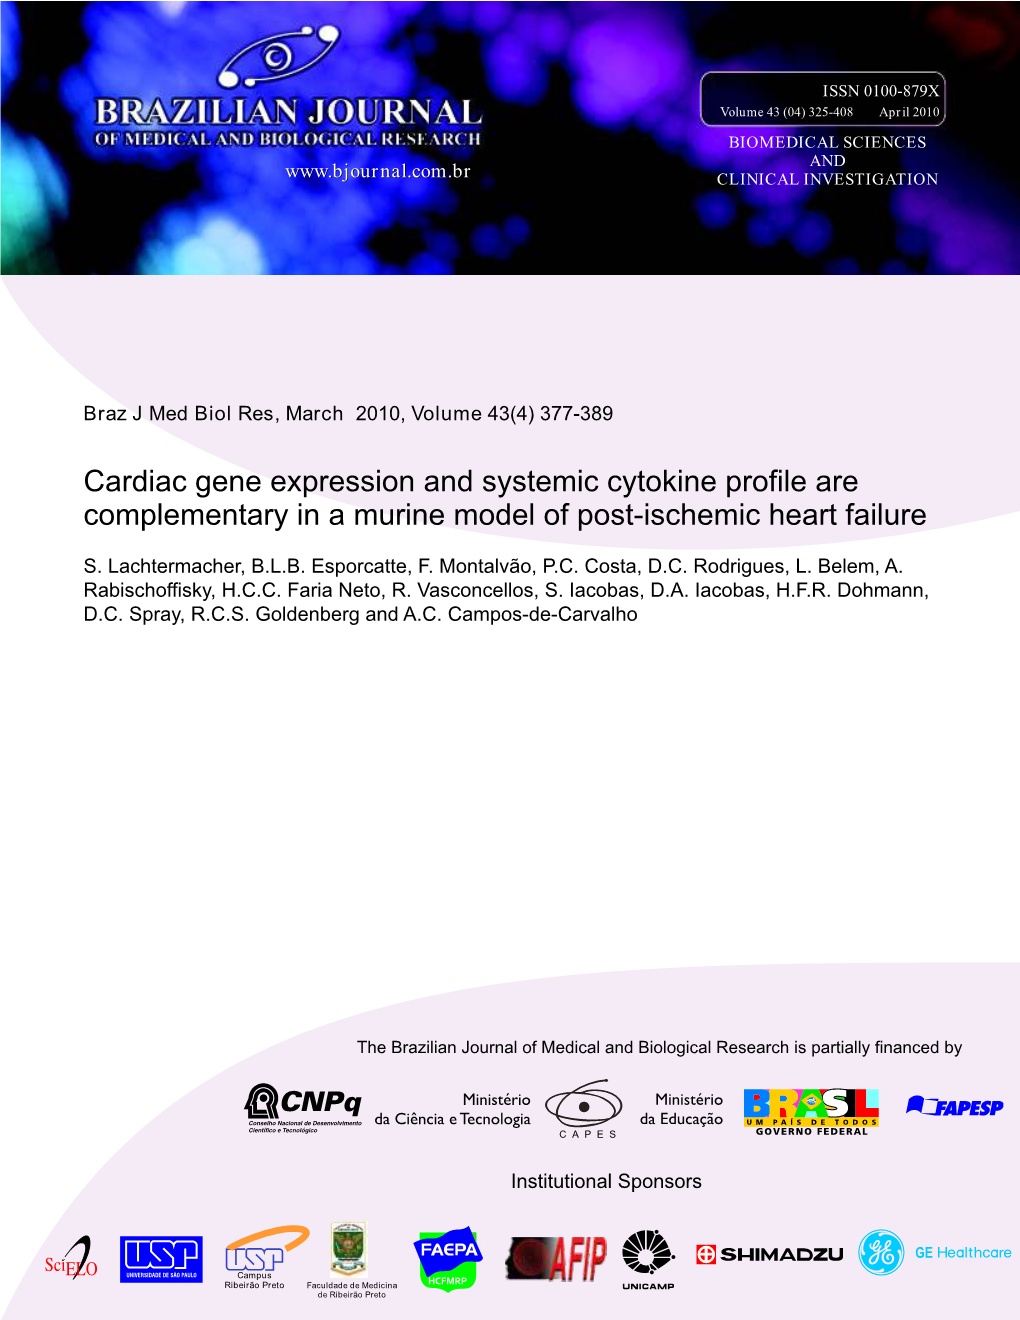 Cardiac Gene Expression and Systemic Cytokine Profile Are Complementary in a Murine Model of Post-Ischemic Heart Failure